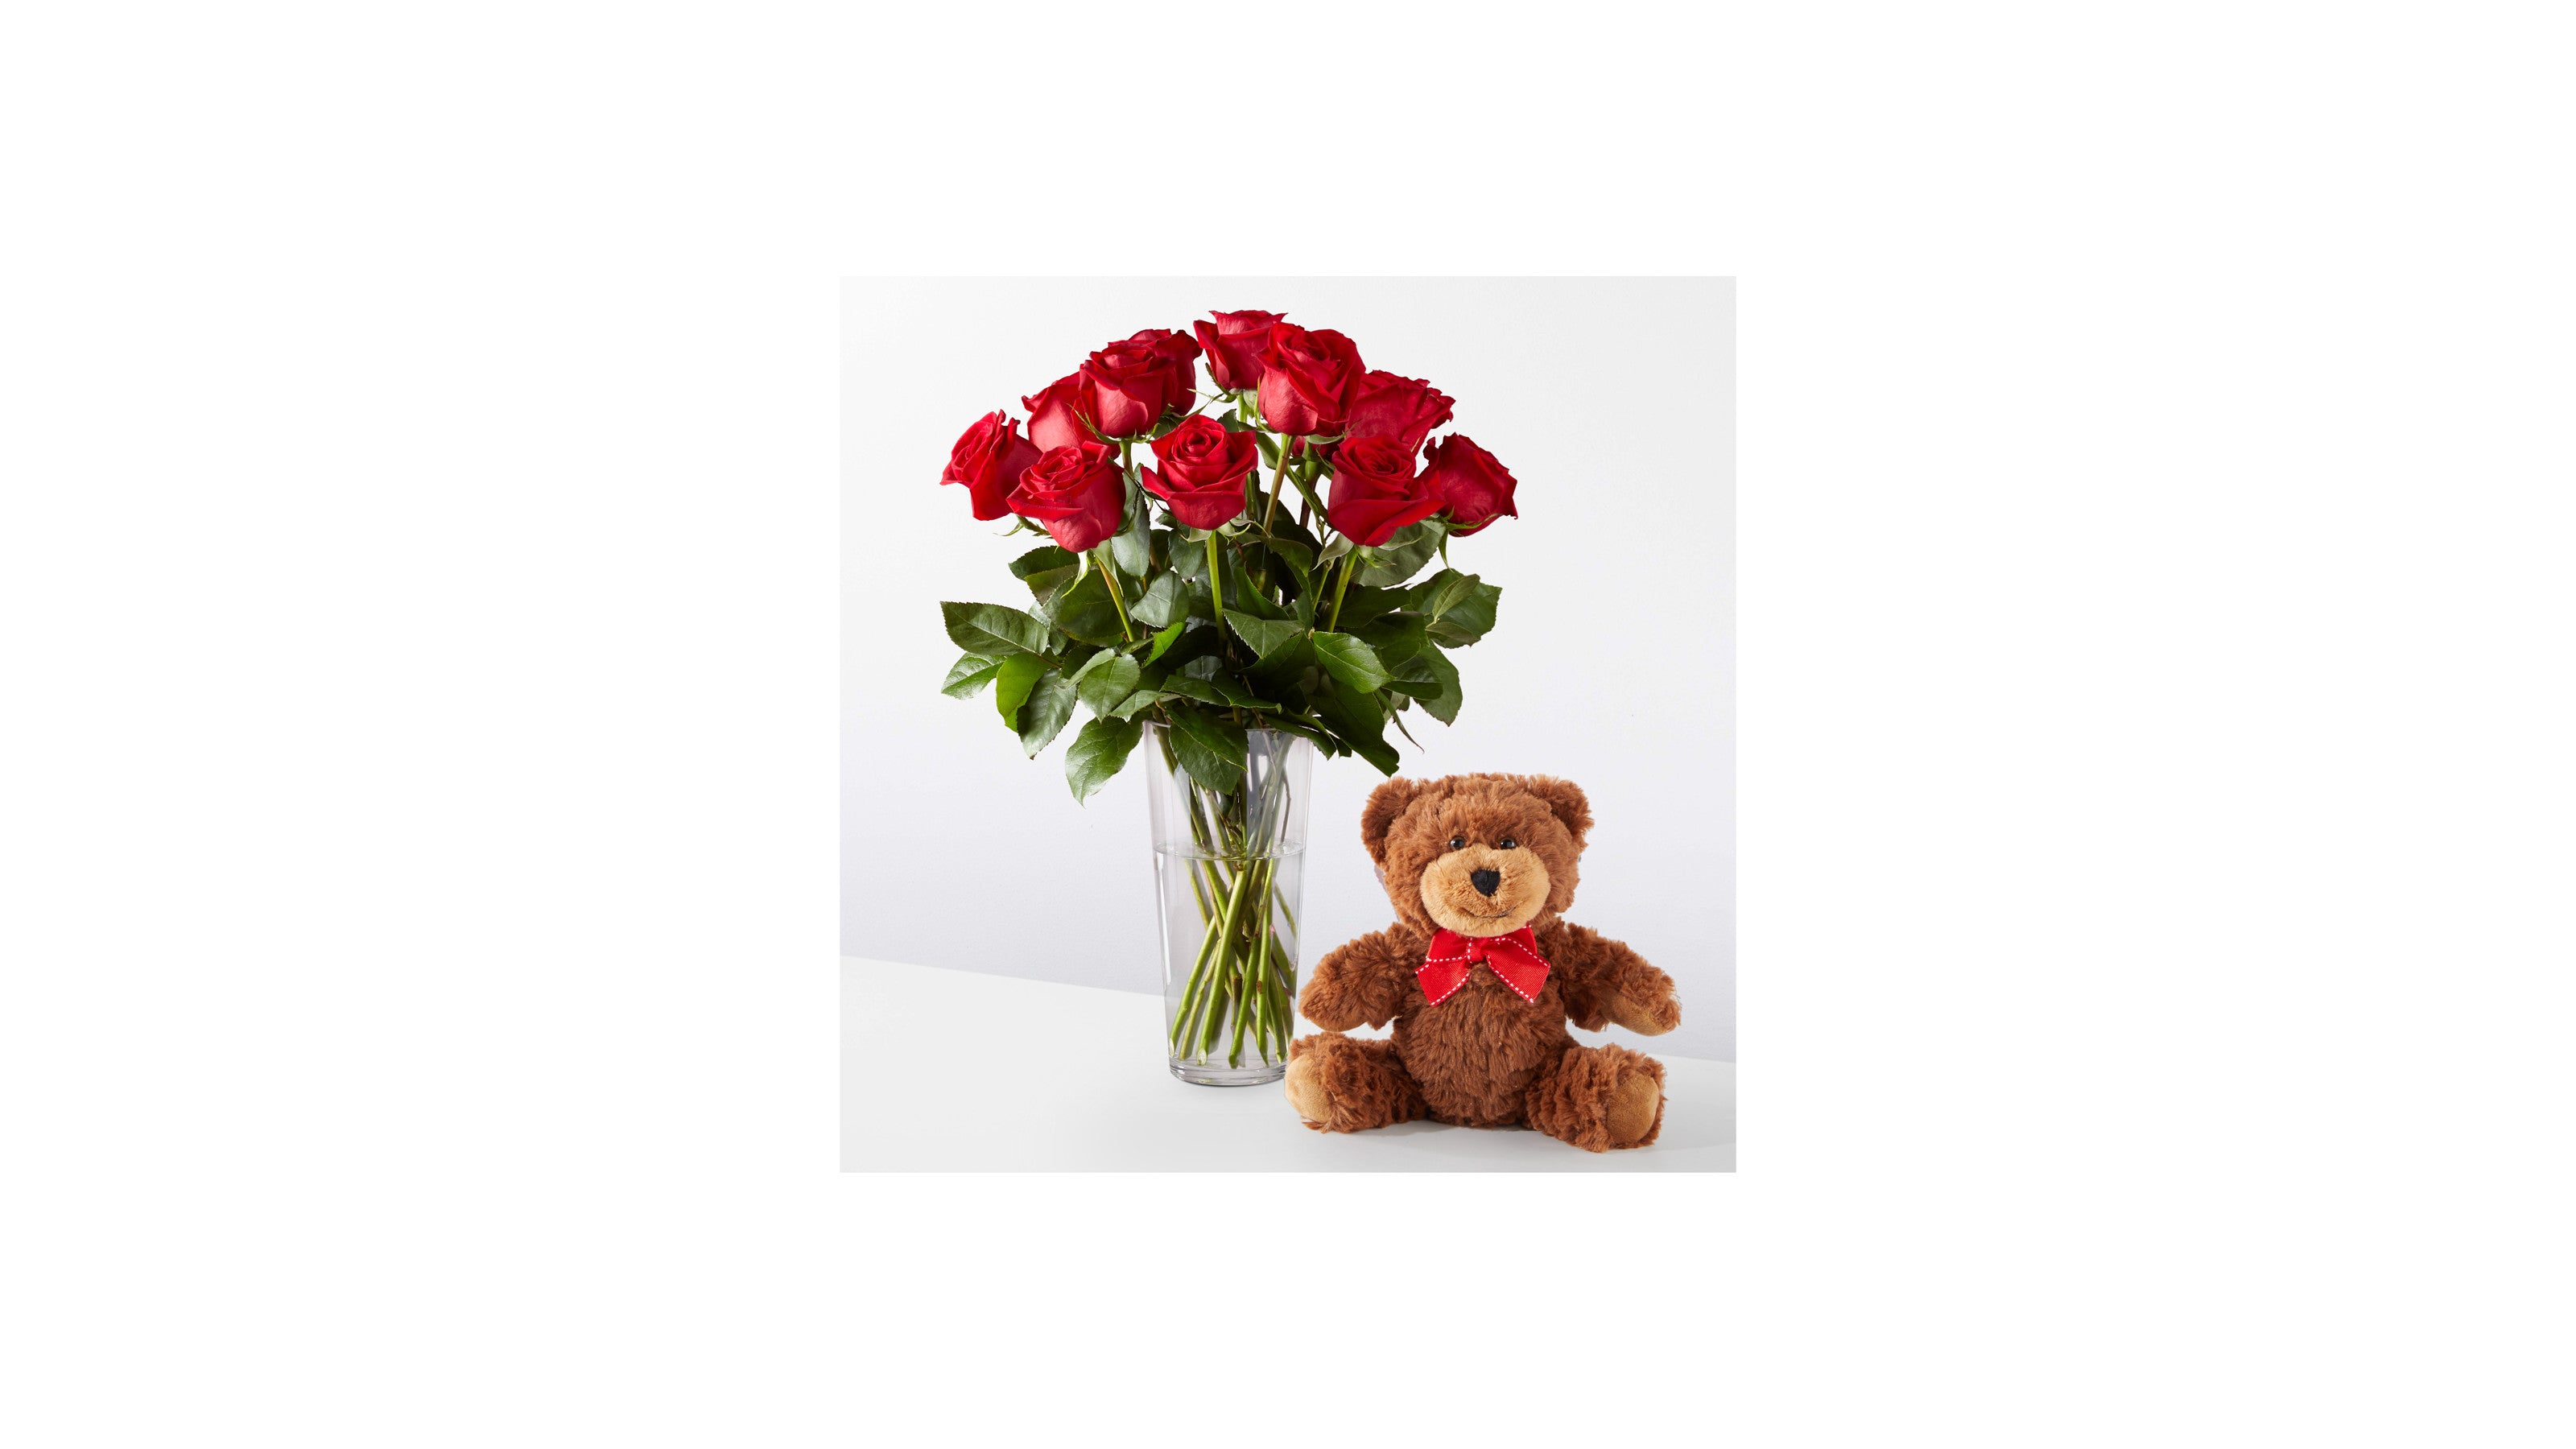 Same Day Gifts Delivery From GiftsbyMeeta Has Set the Pace for This  Valentine's Season